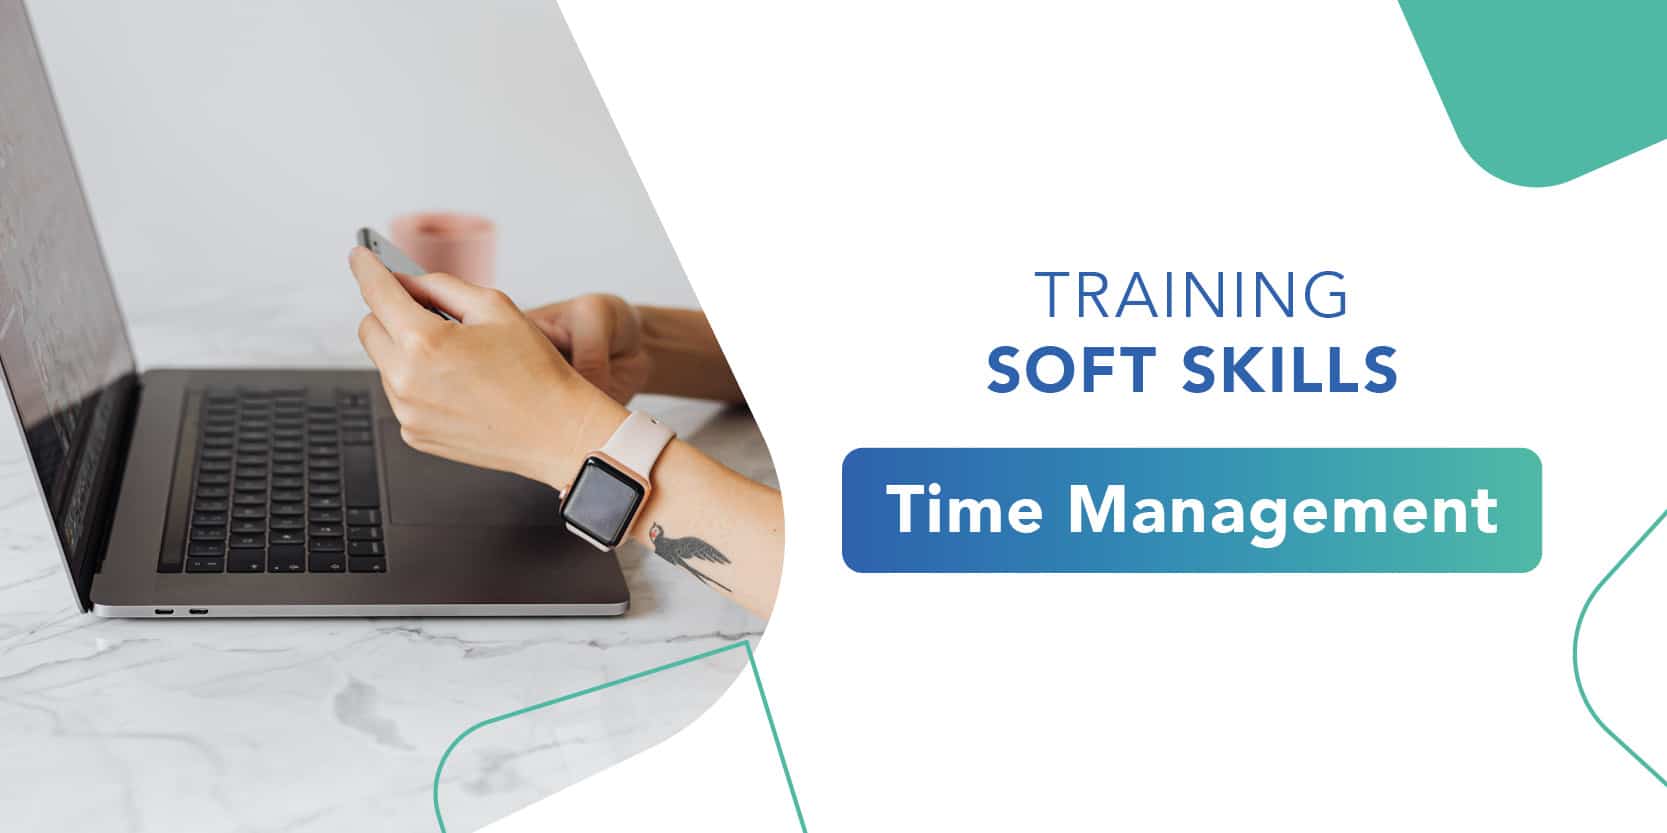 Our Time Management trainings